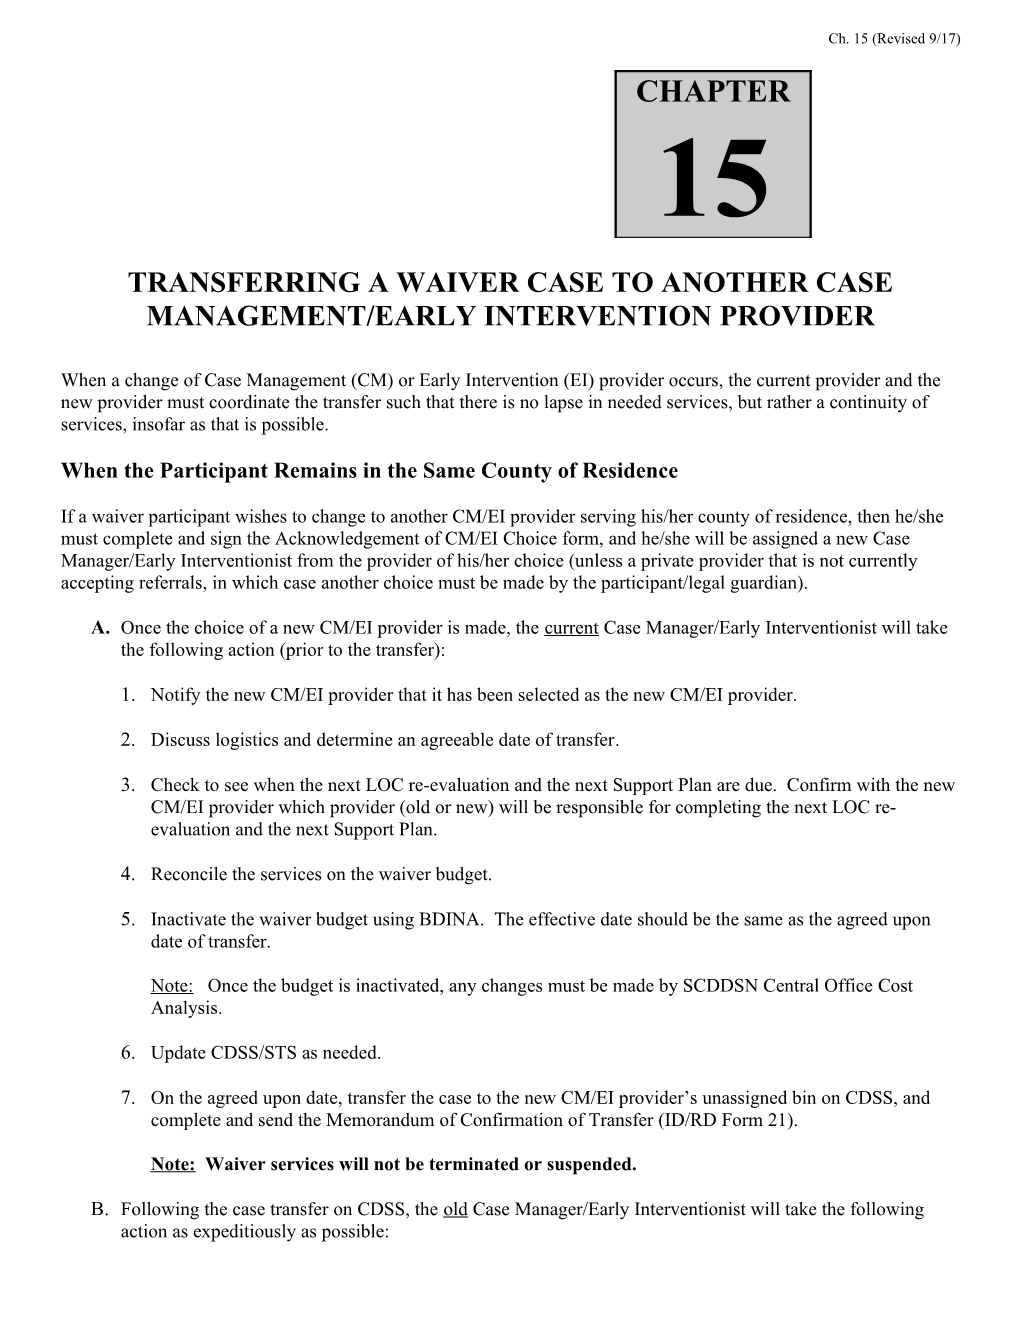 Transferring a Waiver Case to Another Case Management/Early Intervention Provider